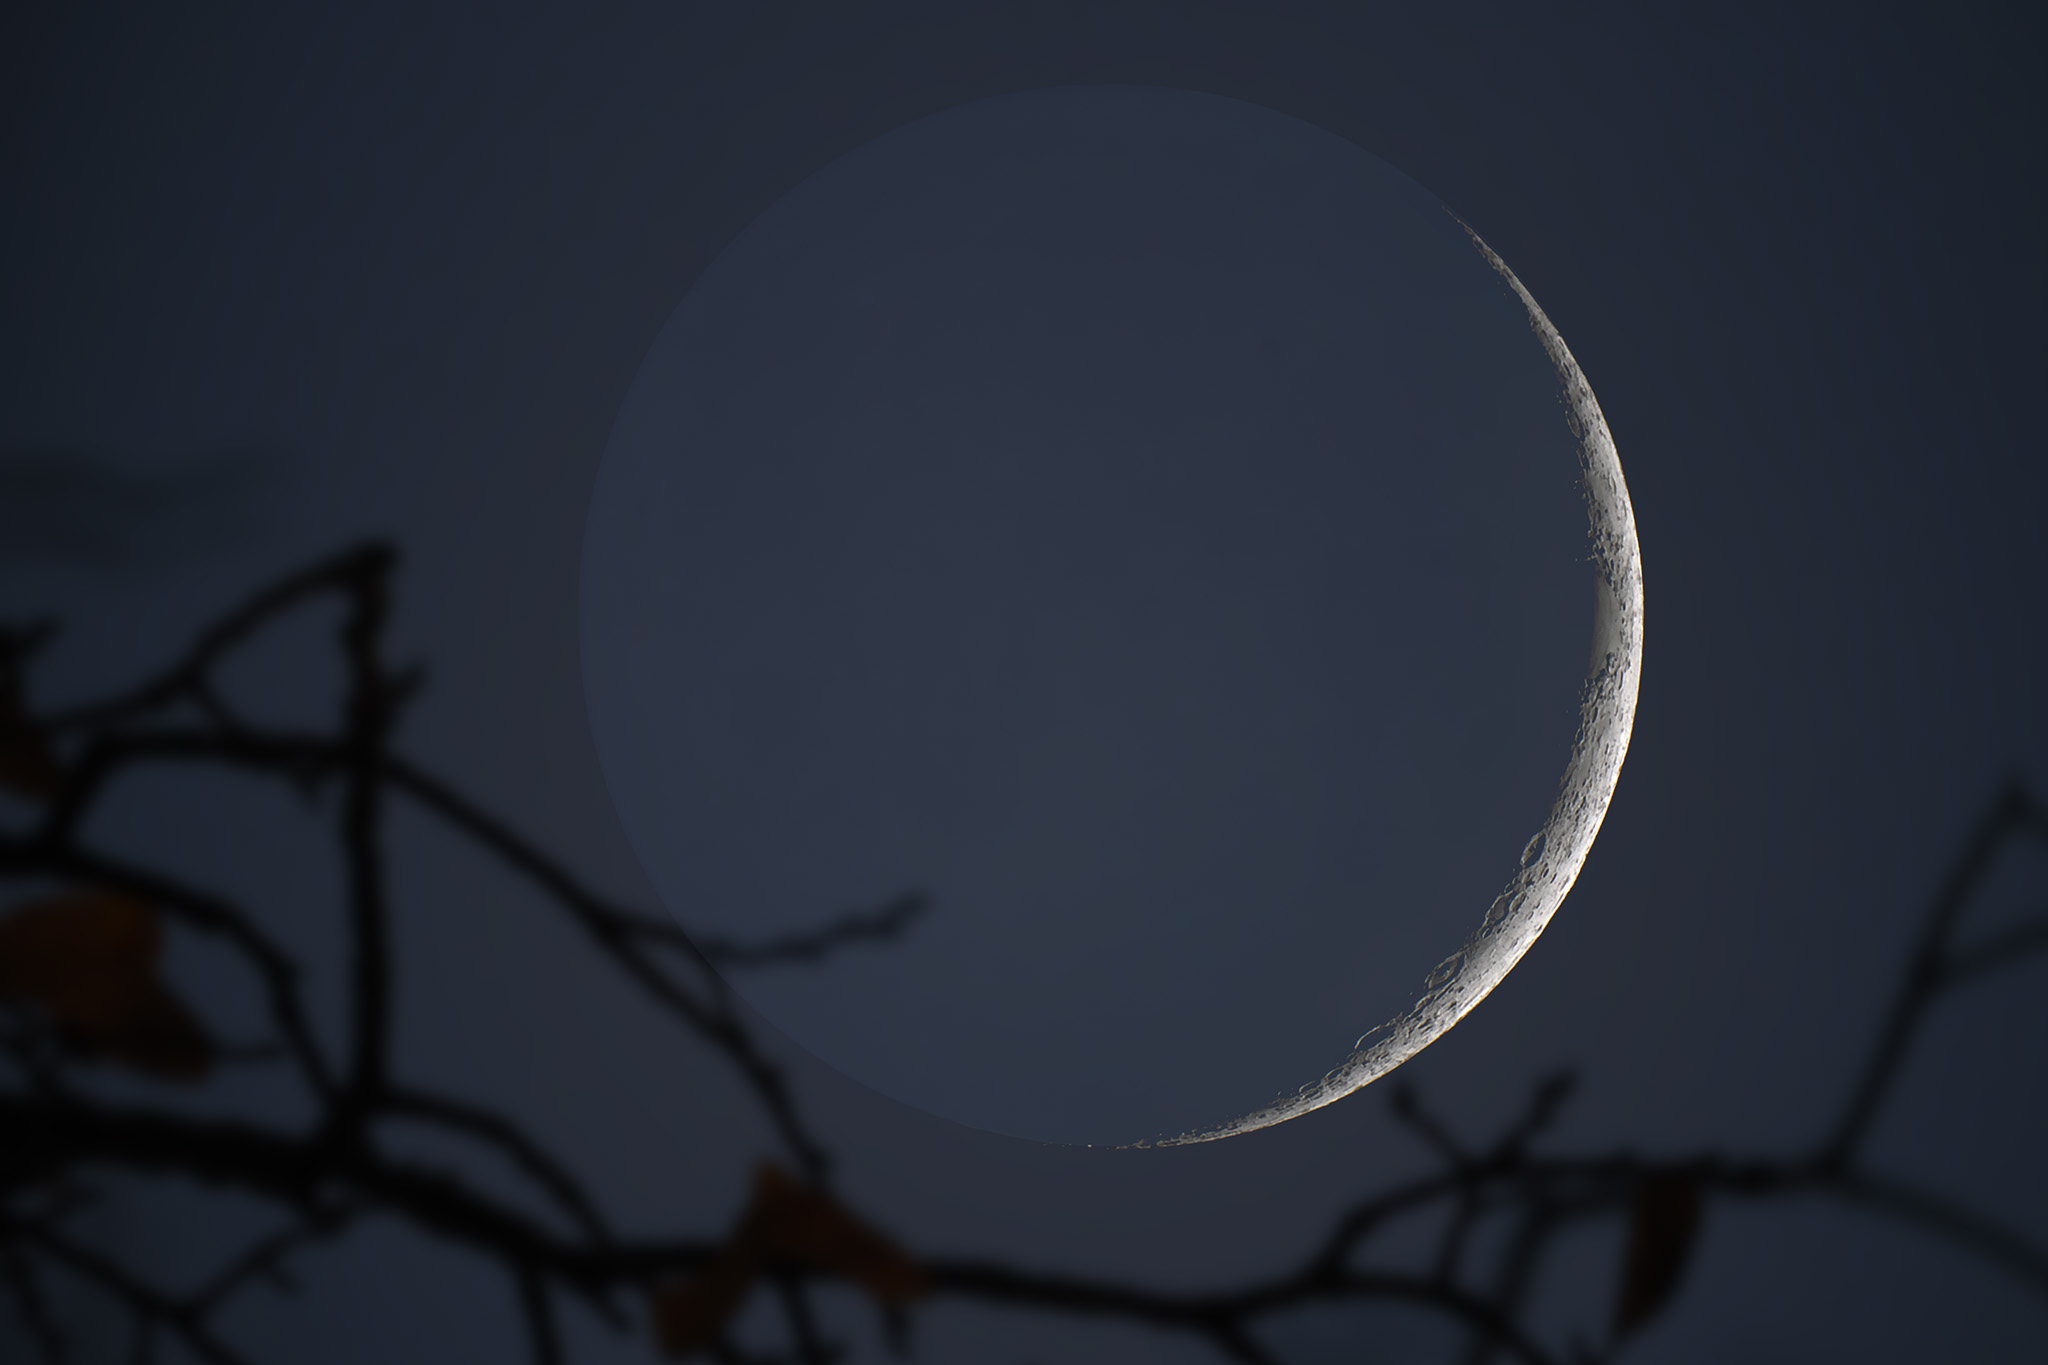 December Solstice Crescent Moon with Earthshine